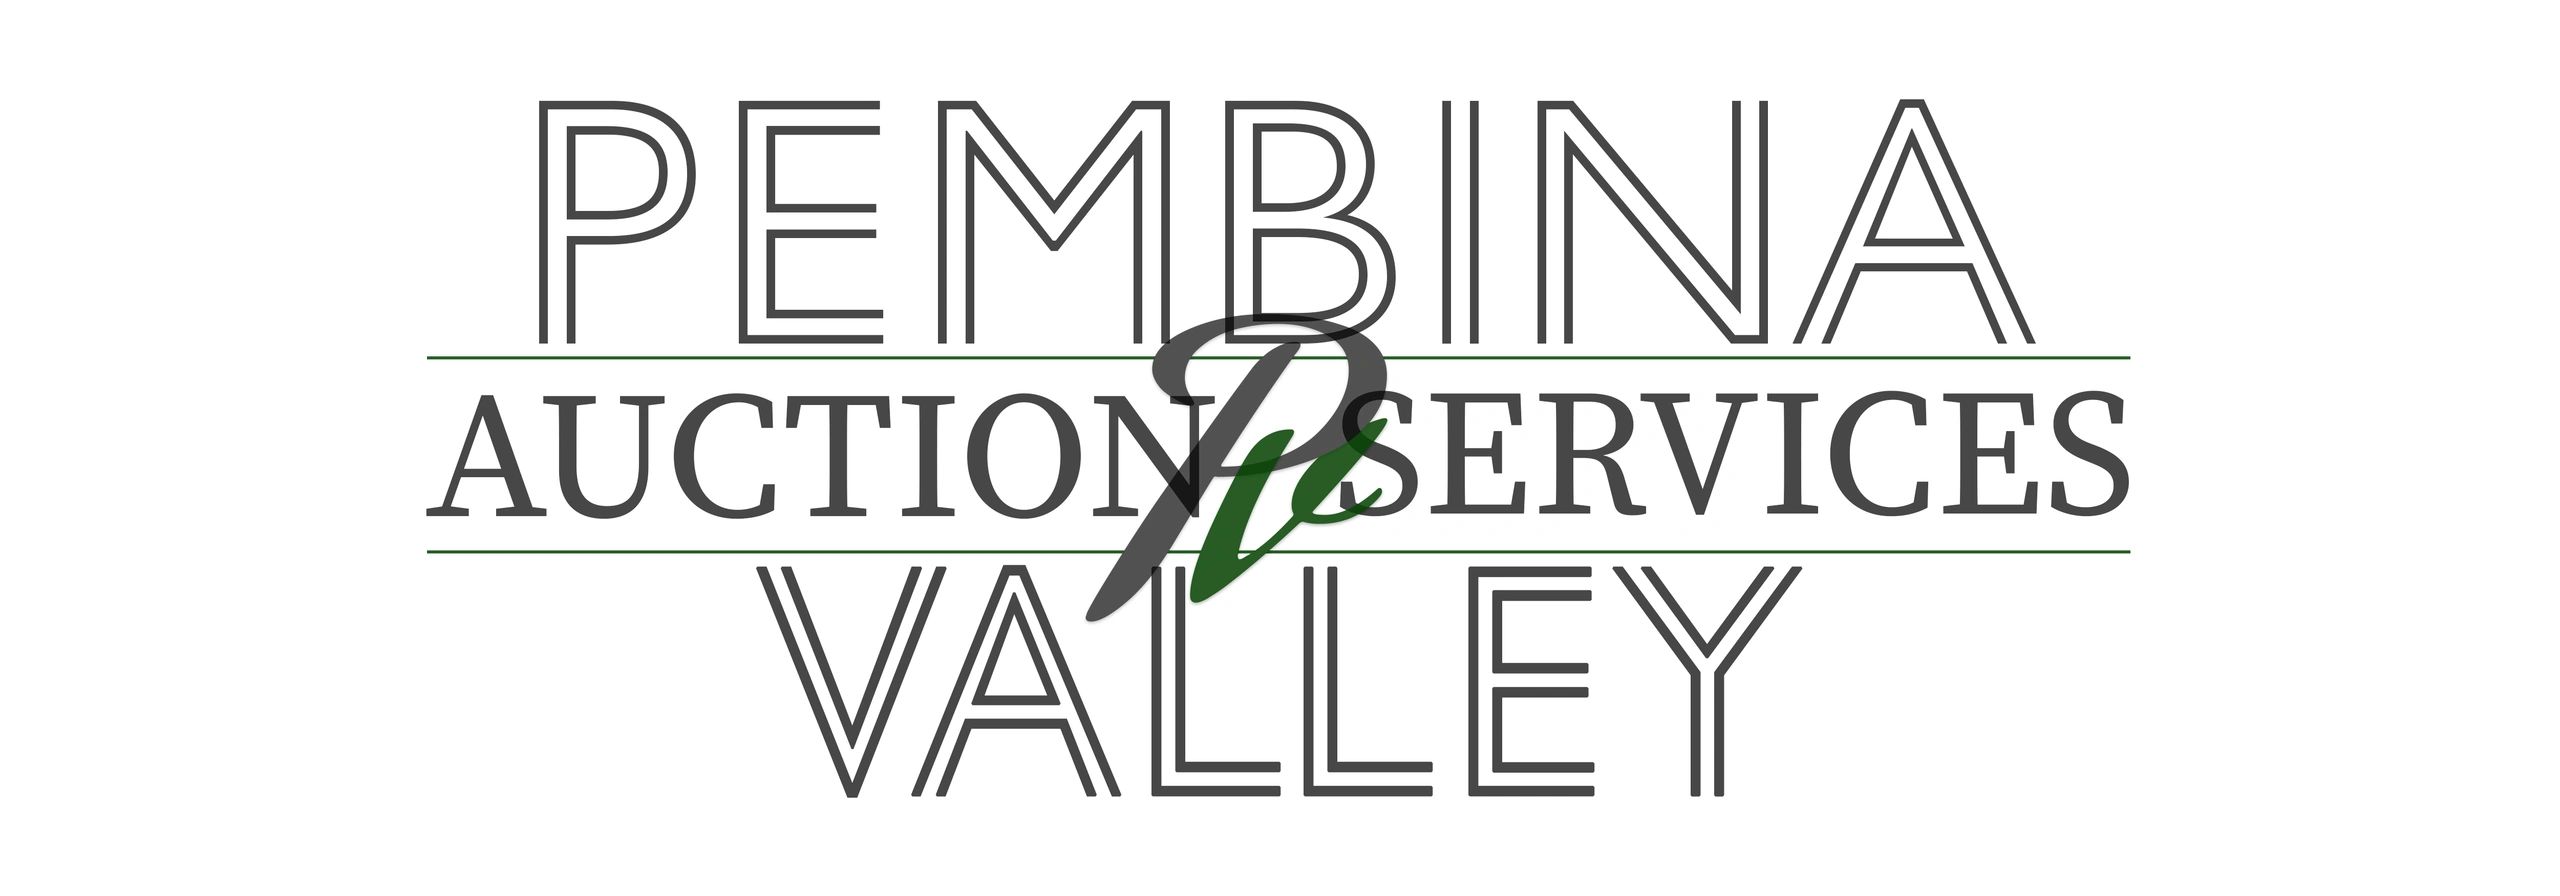 Auctioneer or Auction House - Pembina Valley Auction Services